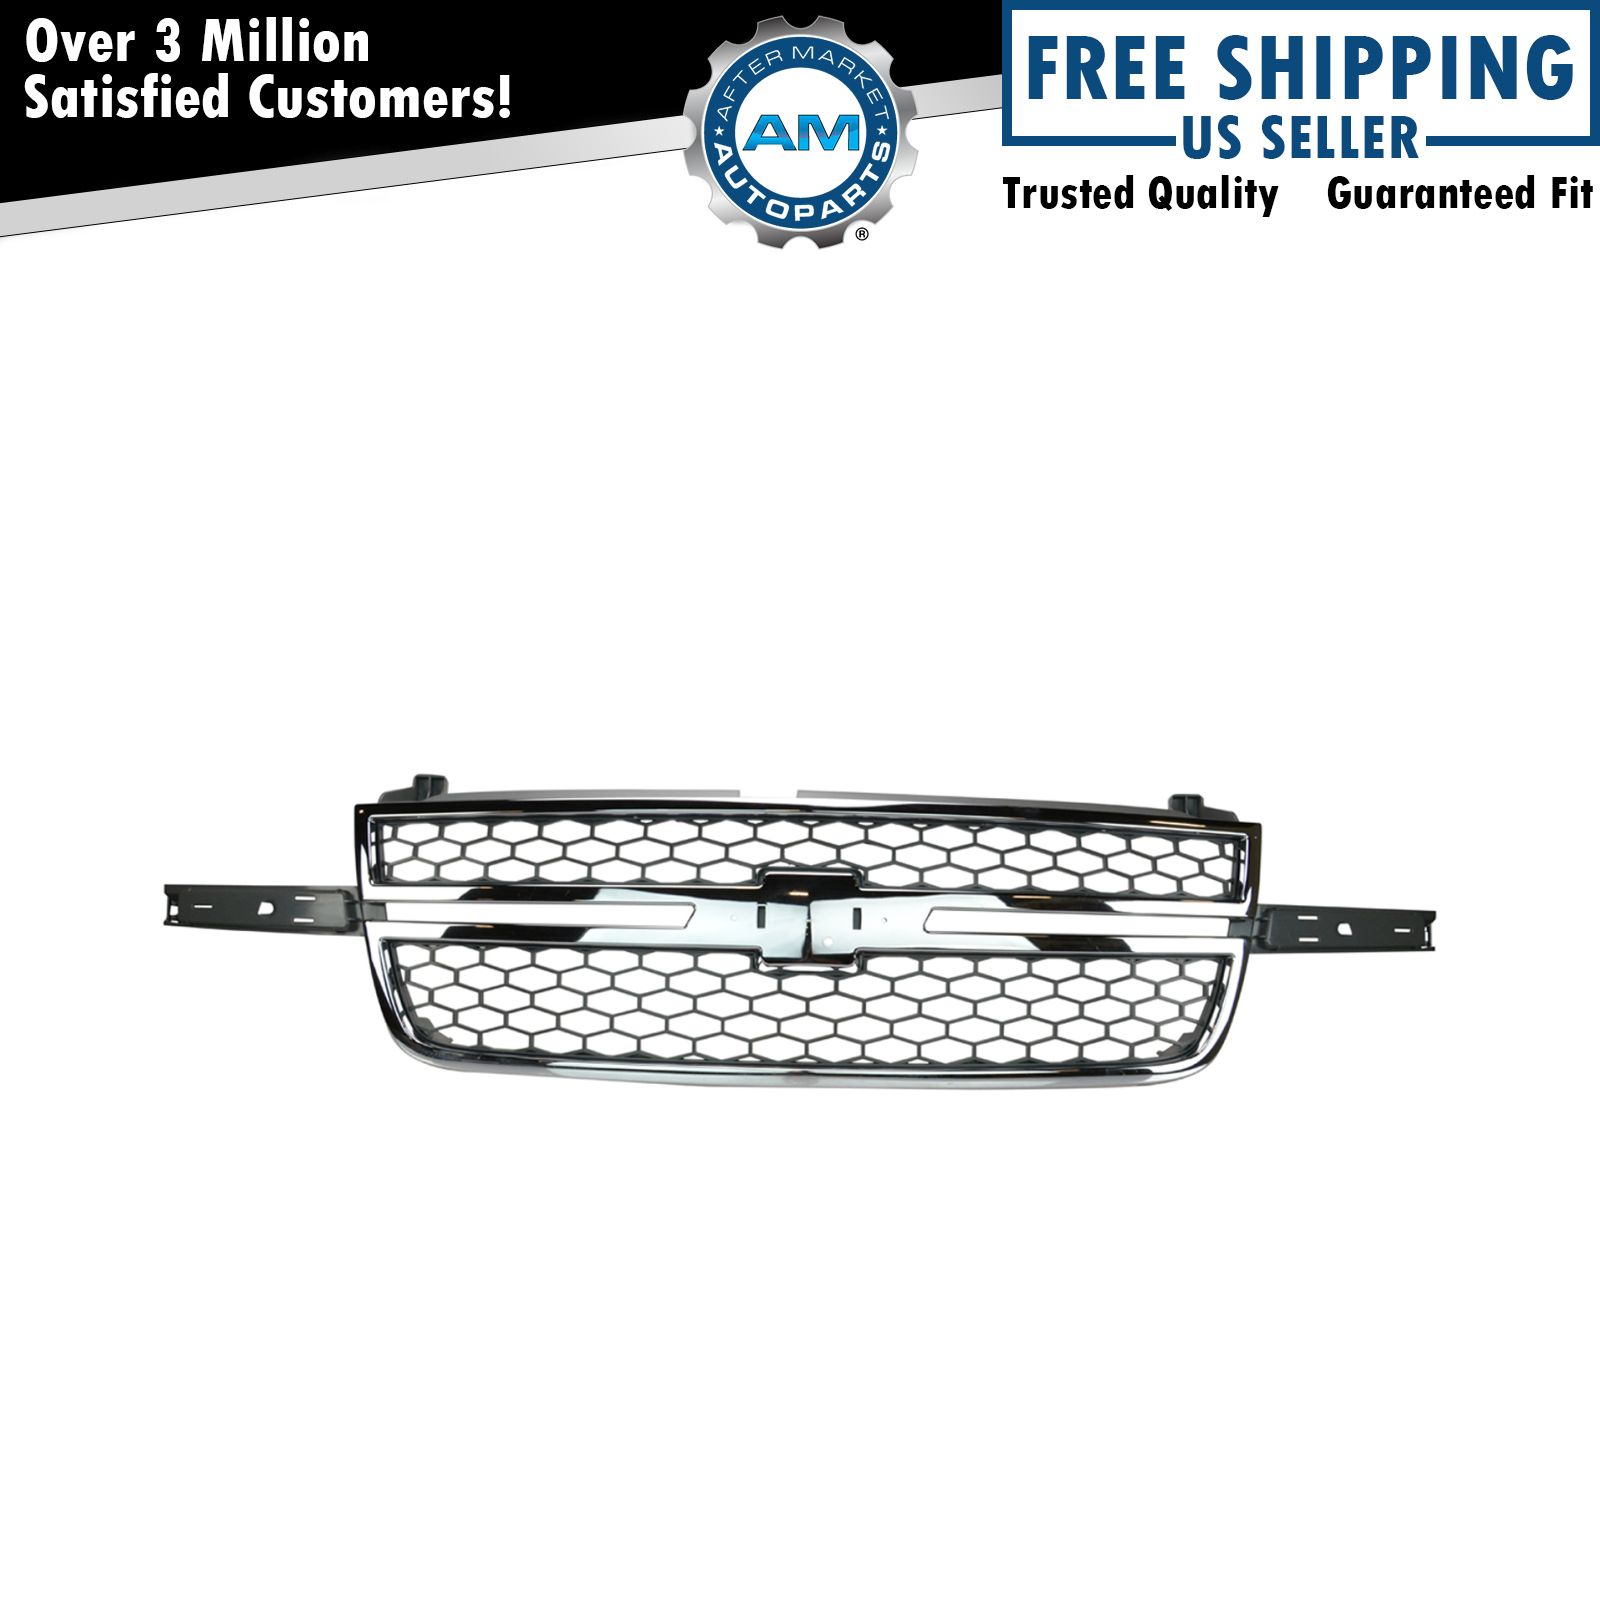 Honeycomb Grille Chrome & Gray for Chevy Silverado Pickup Truck New